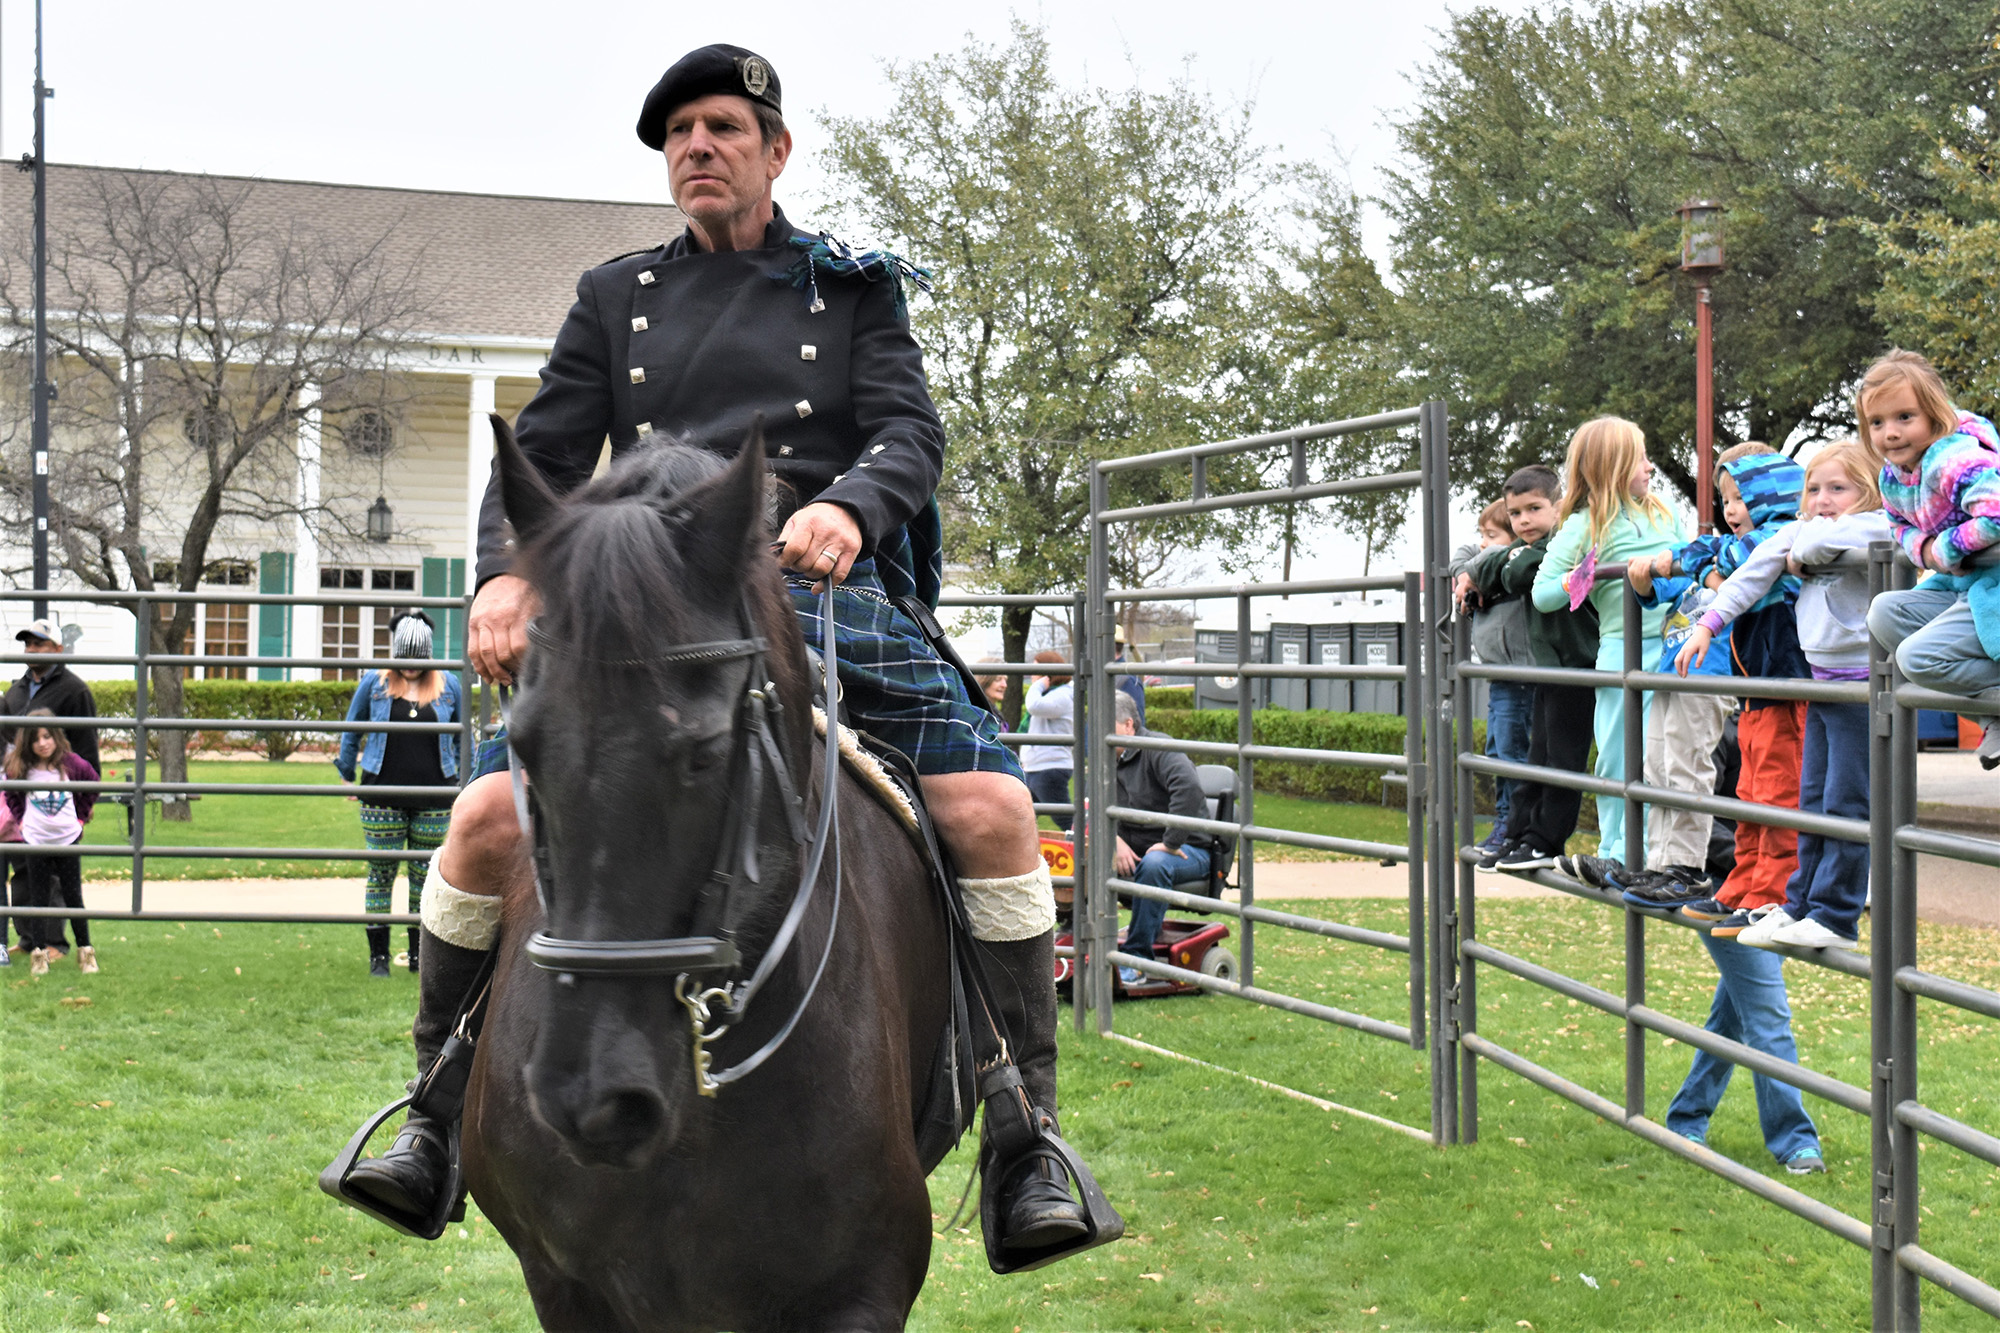 A man rides a horse for a small crowd. He is wearing traditional irish clothing with a buttoned jacket, hat, and kilt